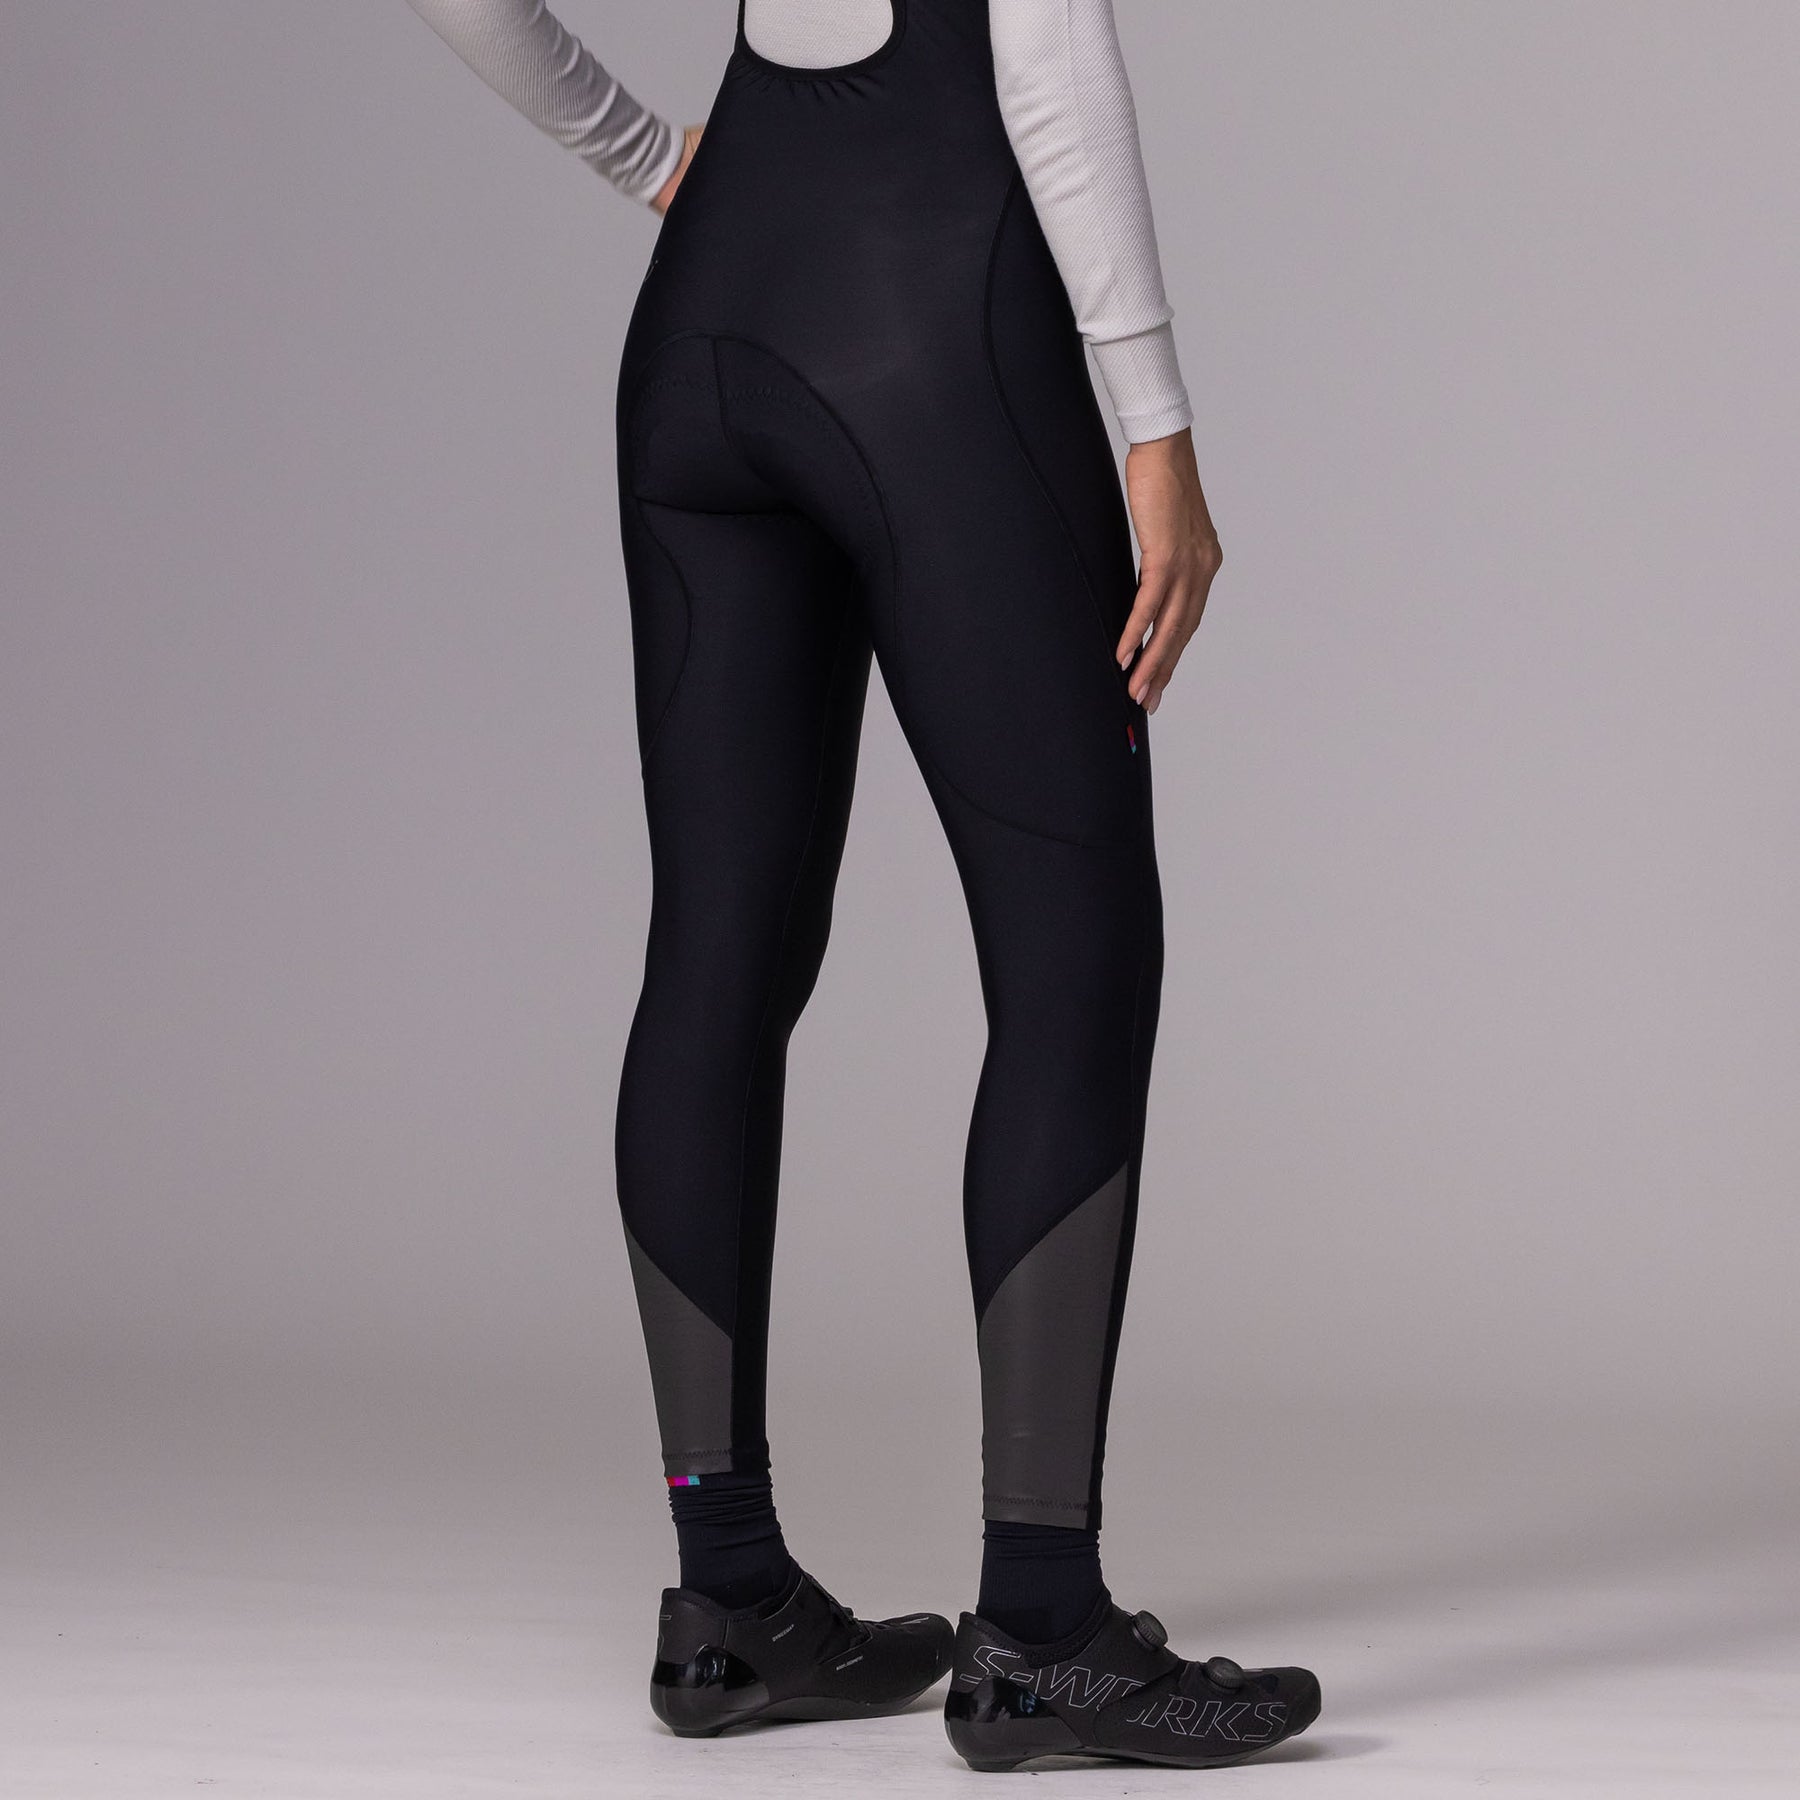  Terry Padless Winter Cycling Tight - Women's Warm